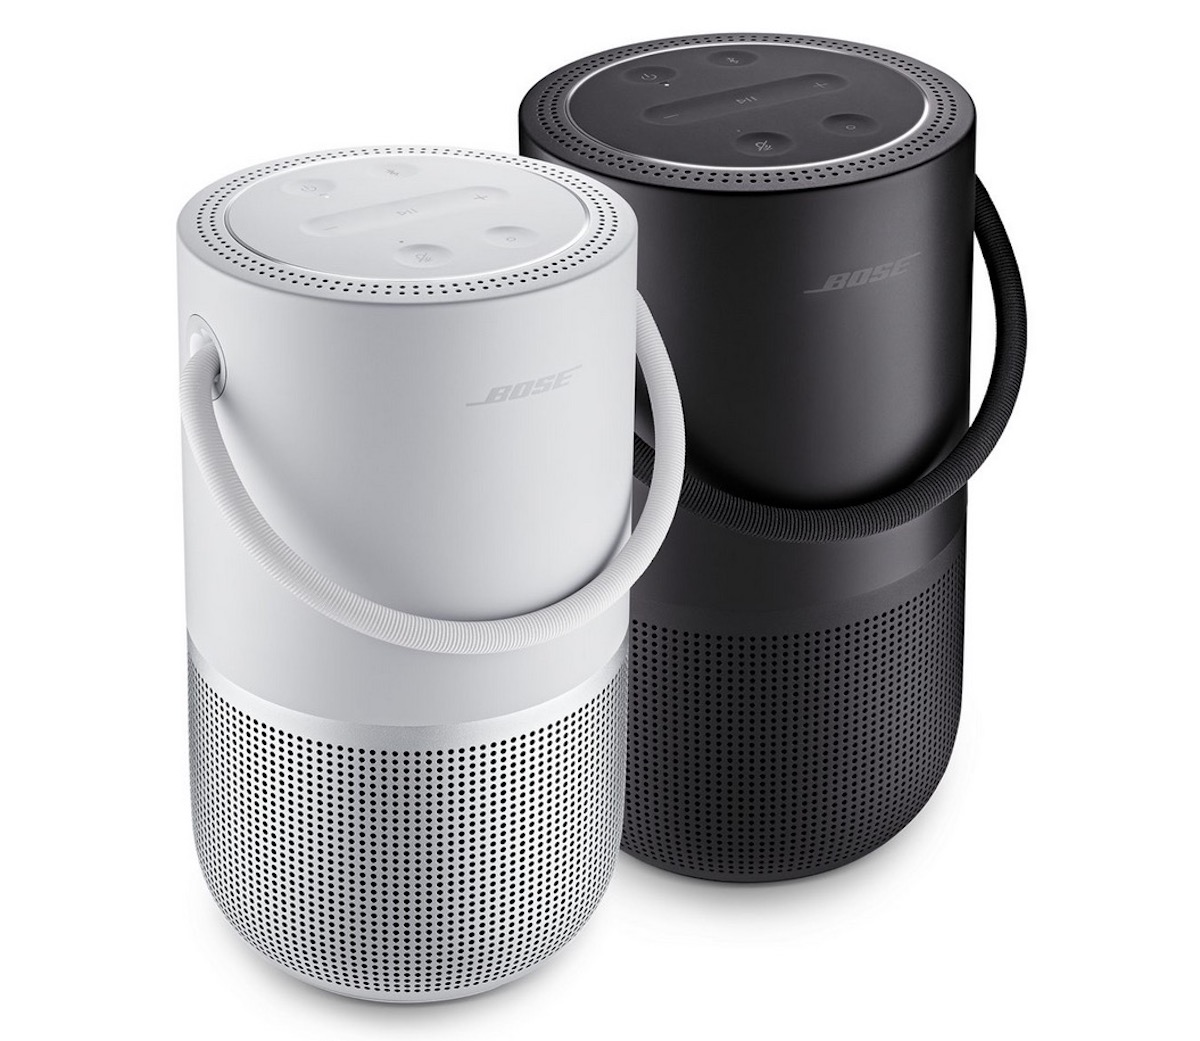 Bose Portable Home Speaker Review